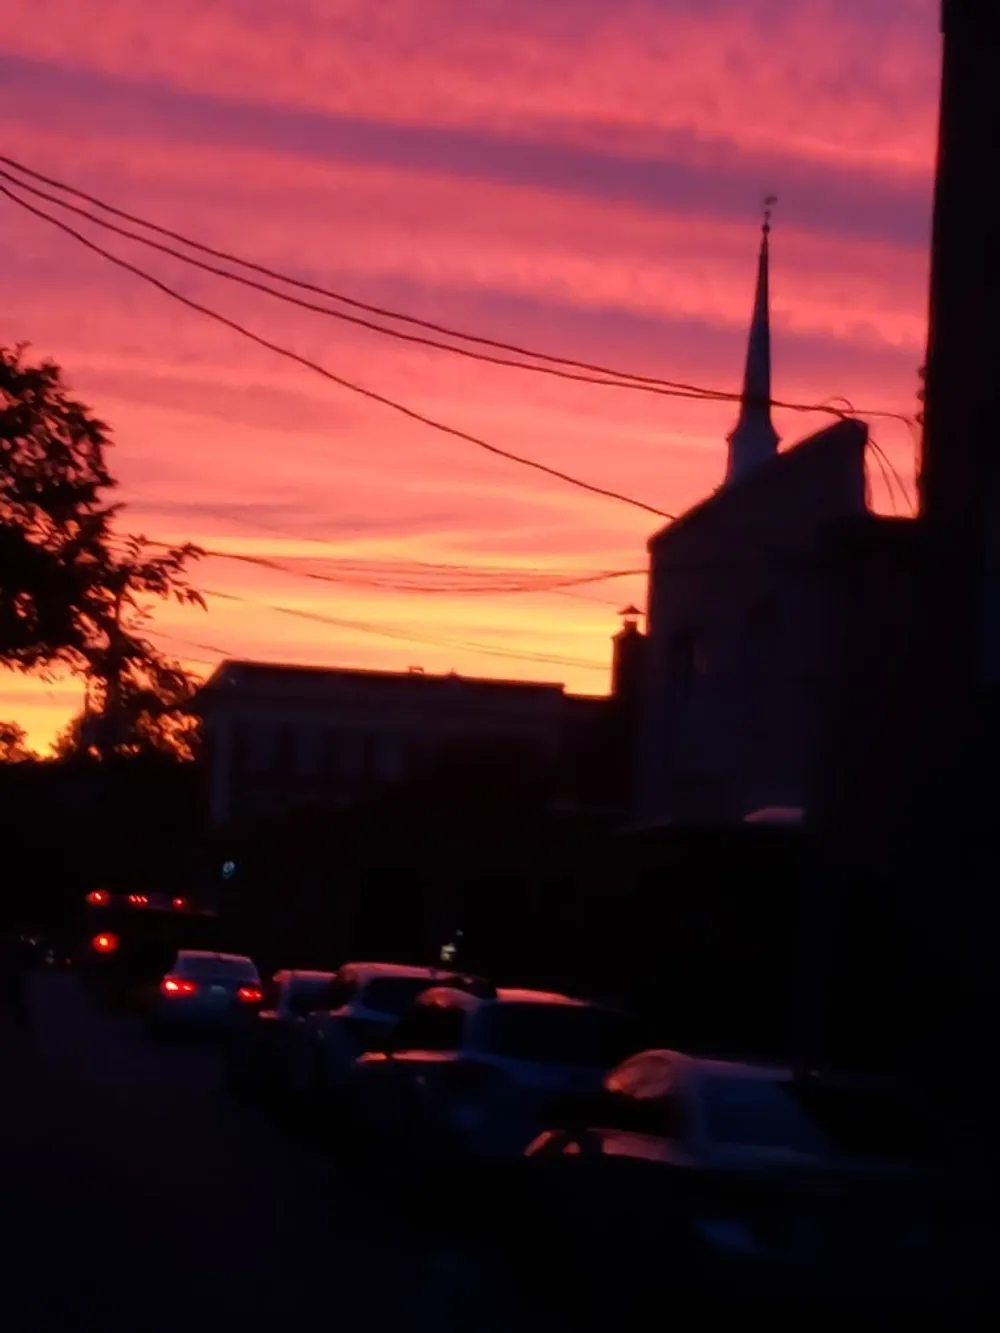 The image captures a vibrant sunset sky in shades of pink and orange above a silhouette of a streetscape featuring buildings a church spire and parked cars